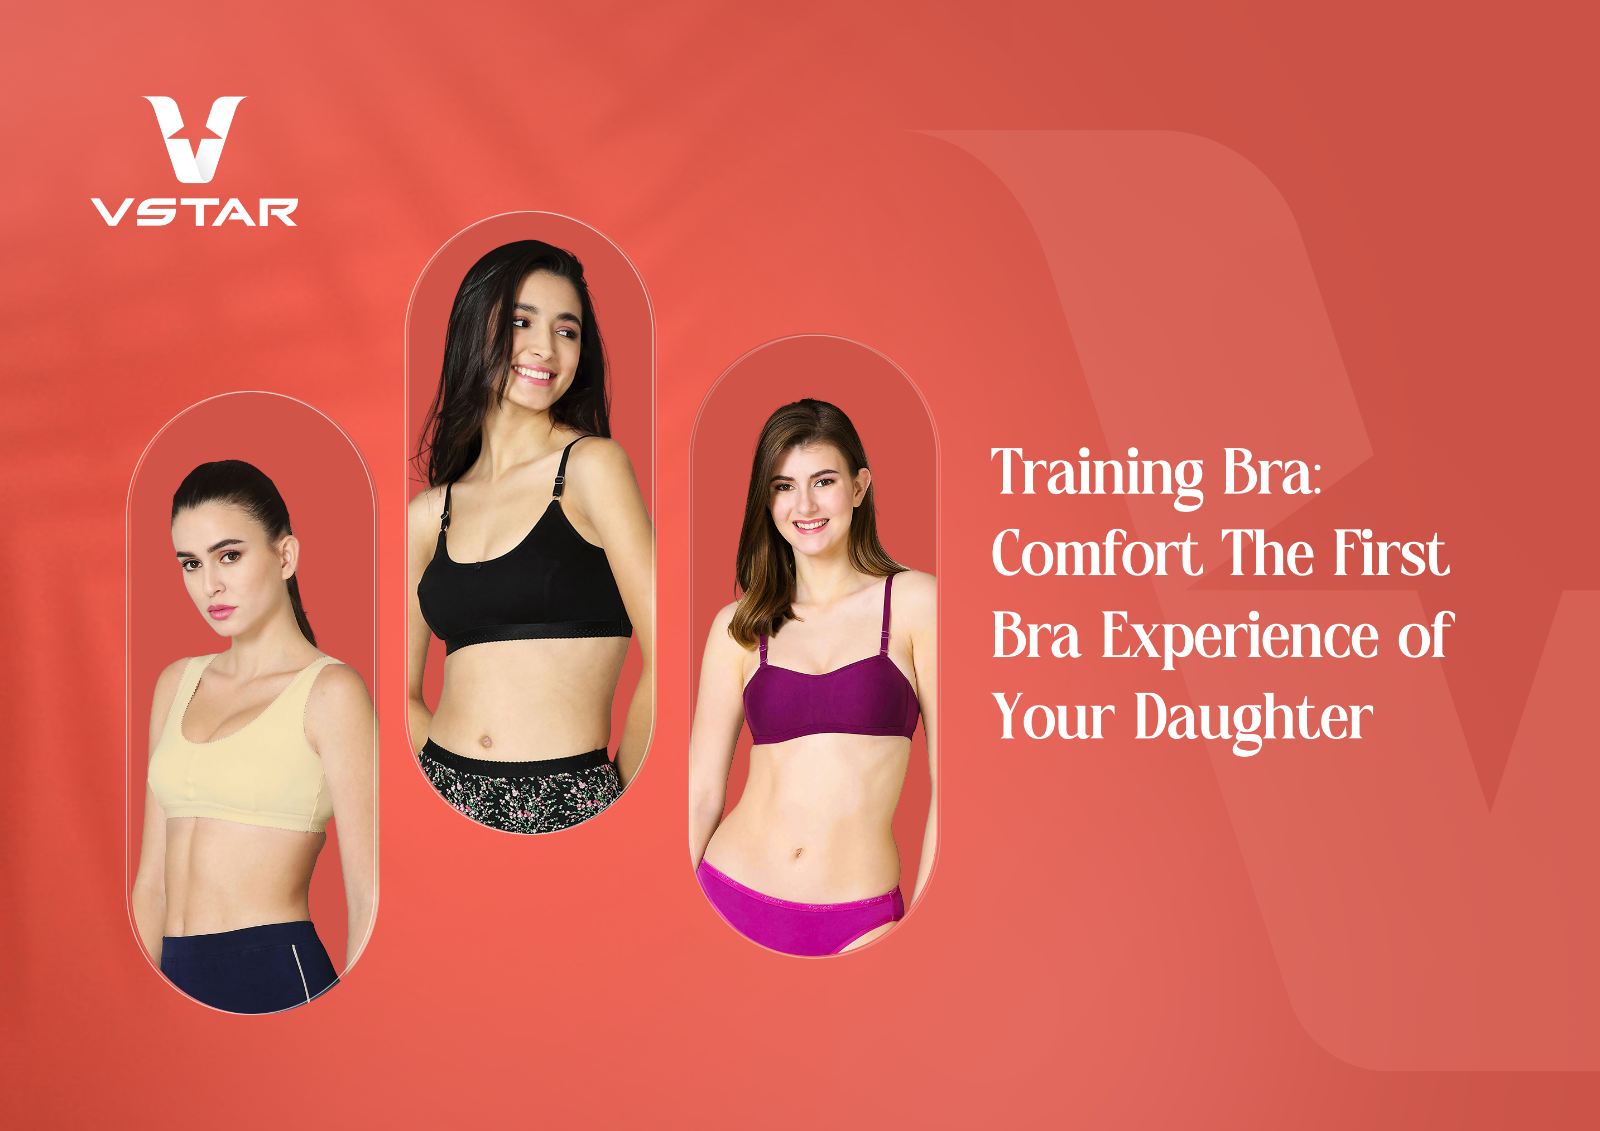 Training Bra: Comfort The First Bra Experience of Your Daughter